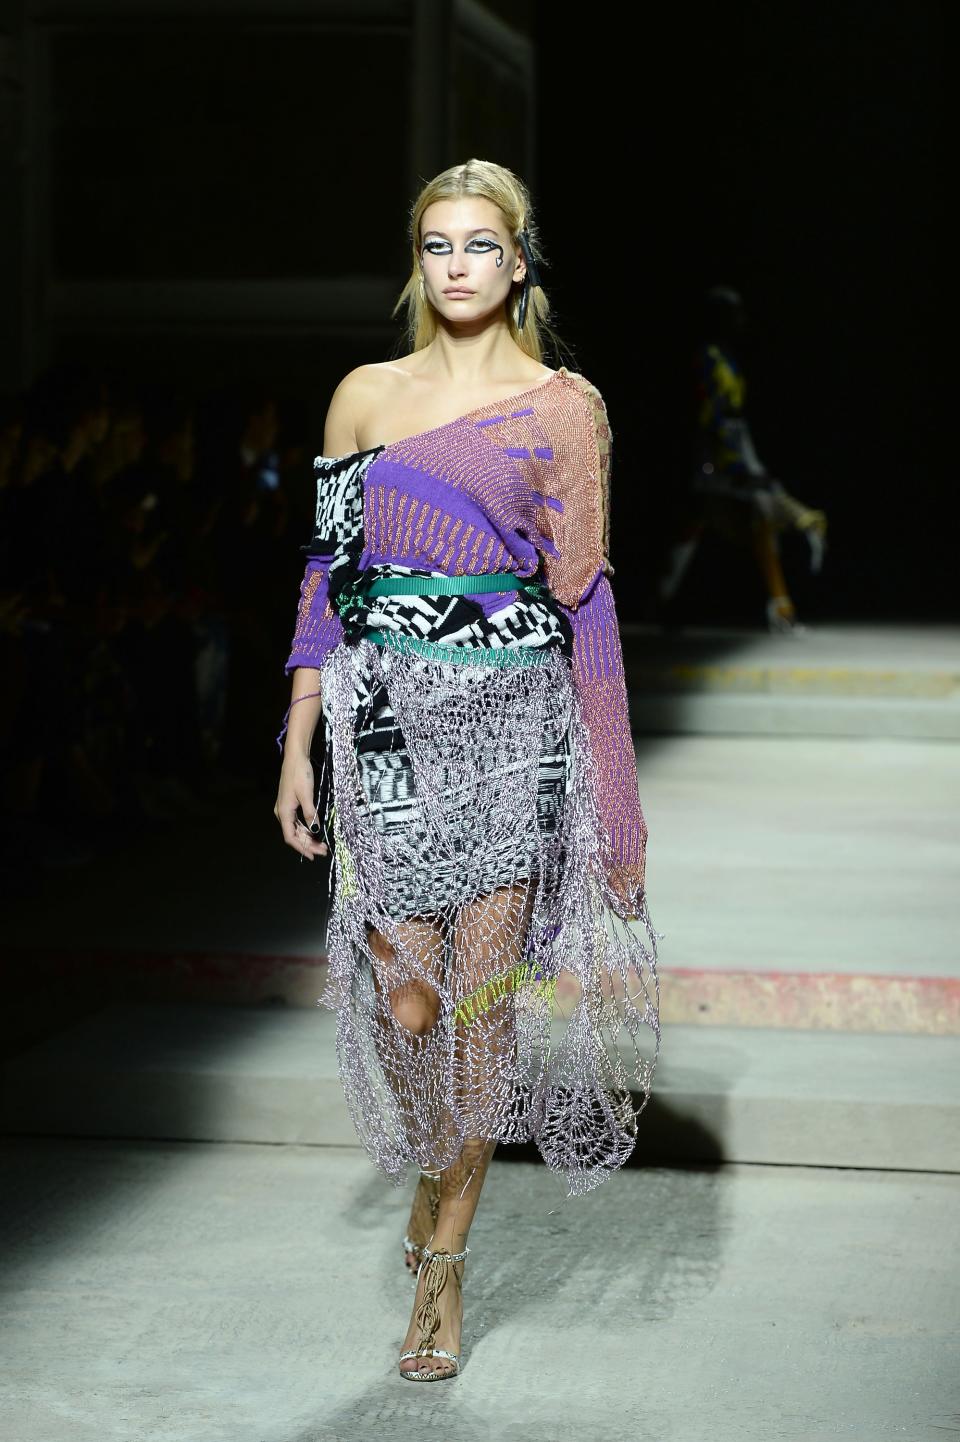 Hailey Baldwin on the Matty Bovan runway. <i>(Photo by Eamonn McCormack/BFC/Getty Images for The British Fashion Council)</i>